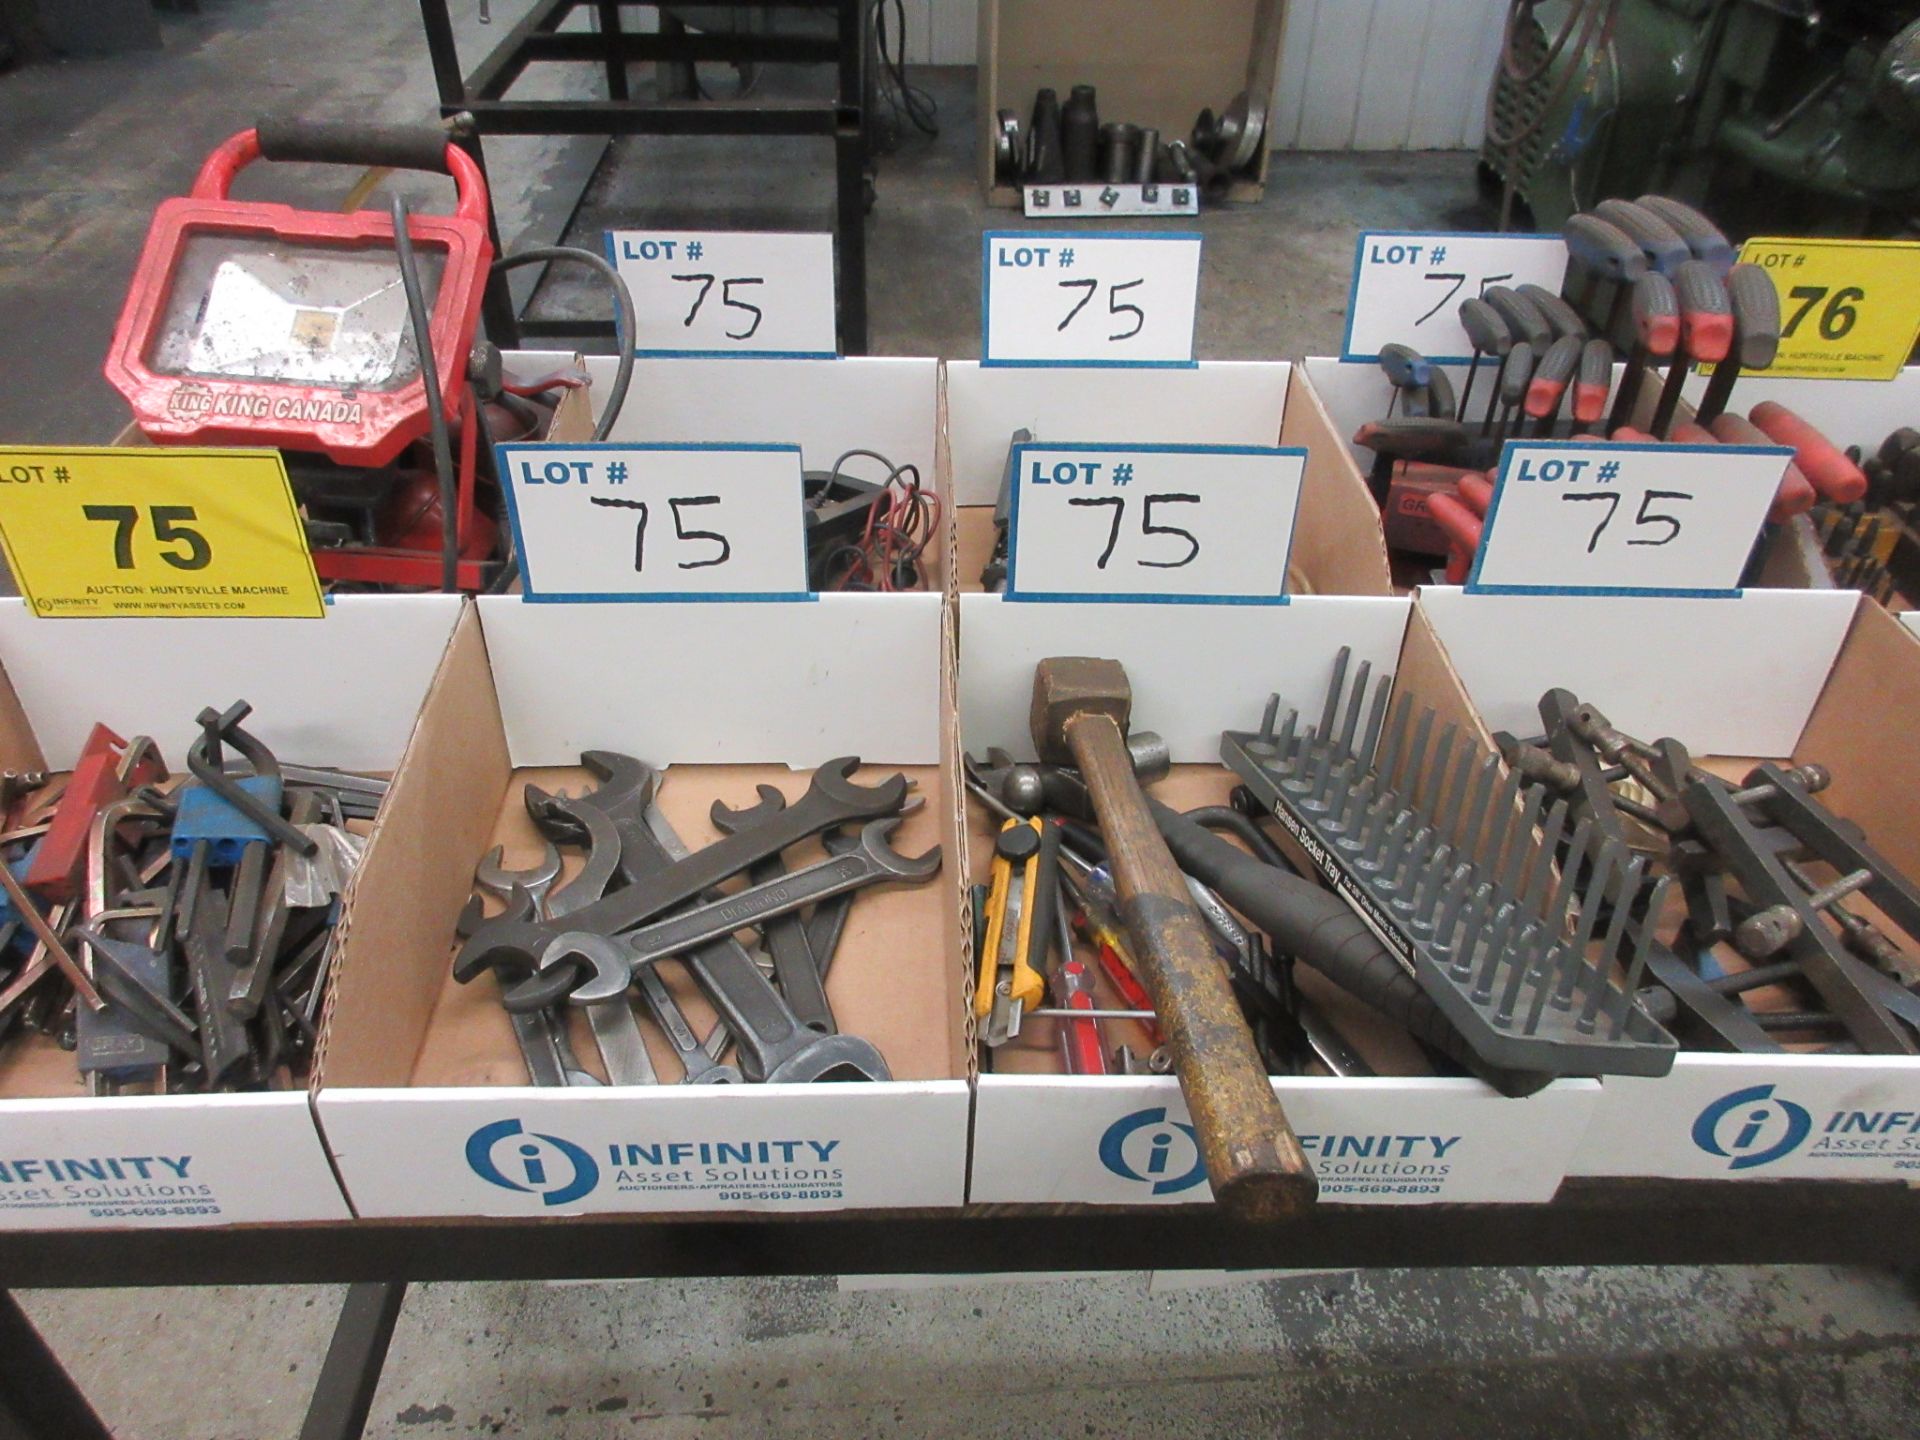 LOT (8) BOXES OF HAND TOOLS, LAMPS, CLAMPS, ELECTRICAL TESTER, PULLER, T-WRENCH SETS, ALLEN KEYS, - Image 4 of 4